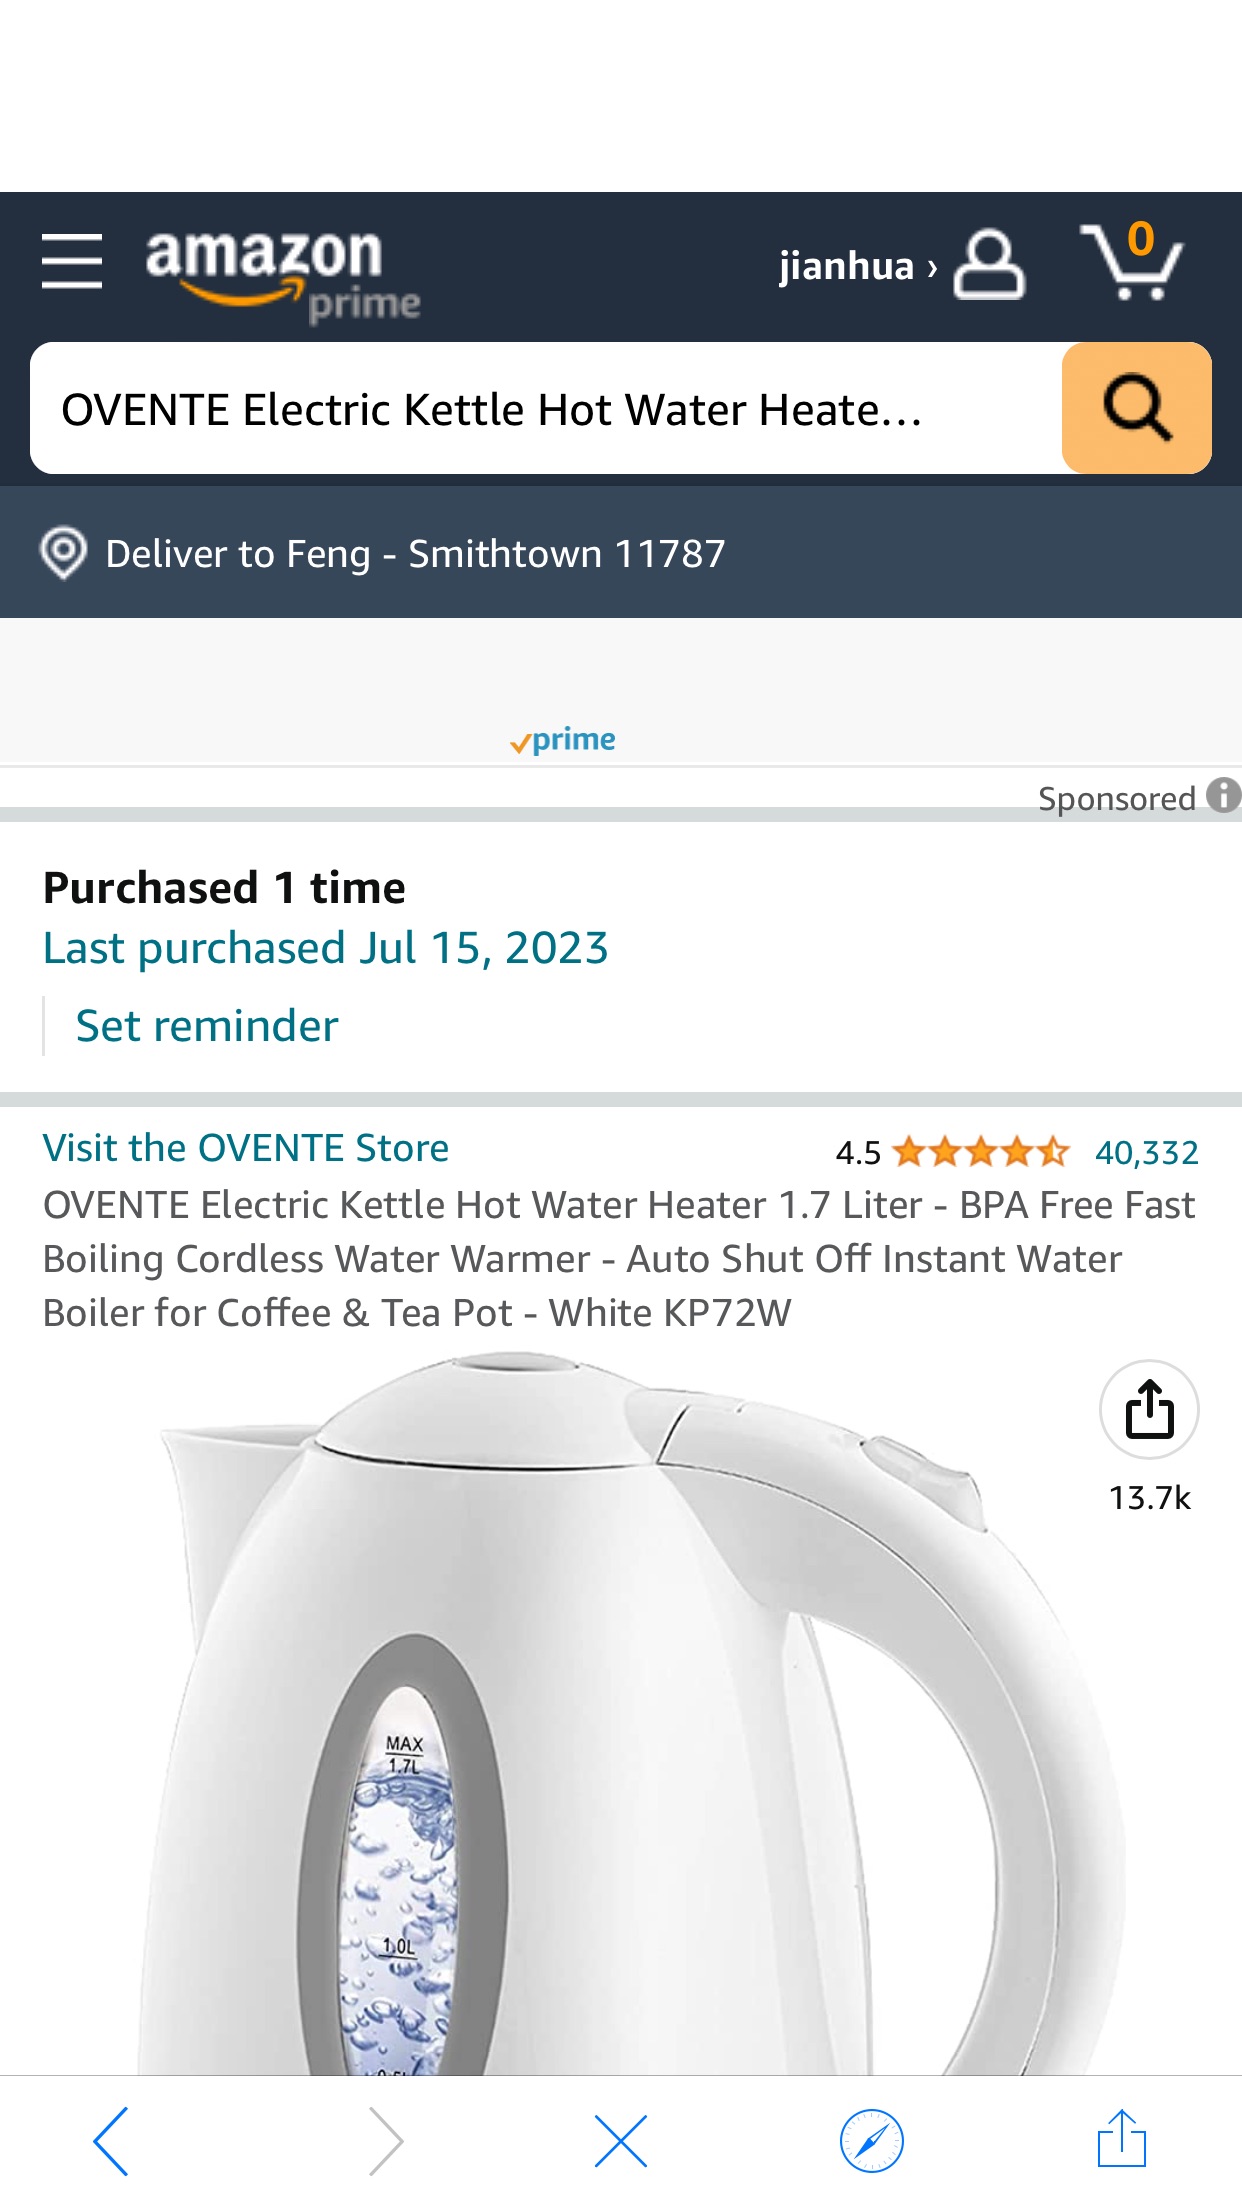 Amazon.com: OVENTE Electric Kettle Hot Water Heater 1.7 Liter - BPA Free Fast Boiling Cordless Water Warmer - Auto Shut Off Instant Water Boiler for Coffee & Tea Pot - White KP72W: Electric Water Kettle: Home & Kitchen